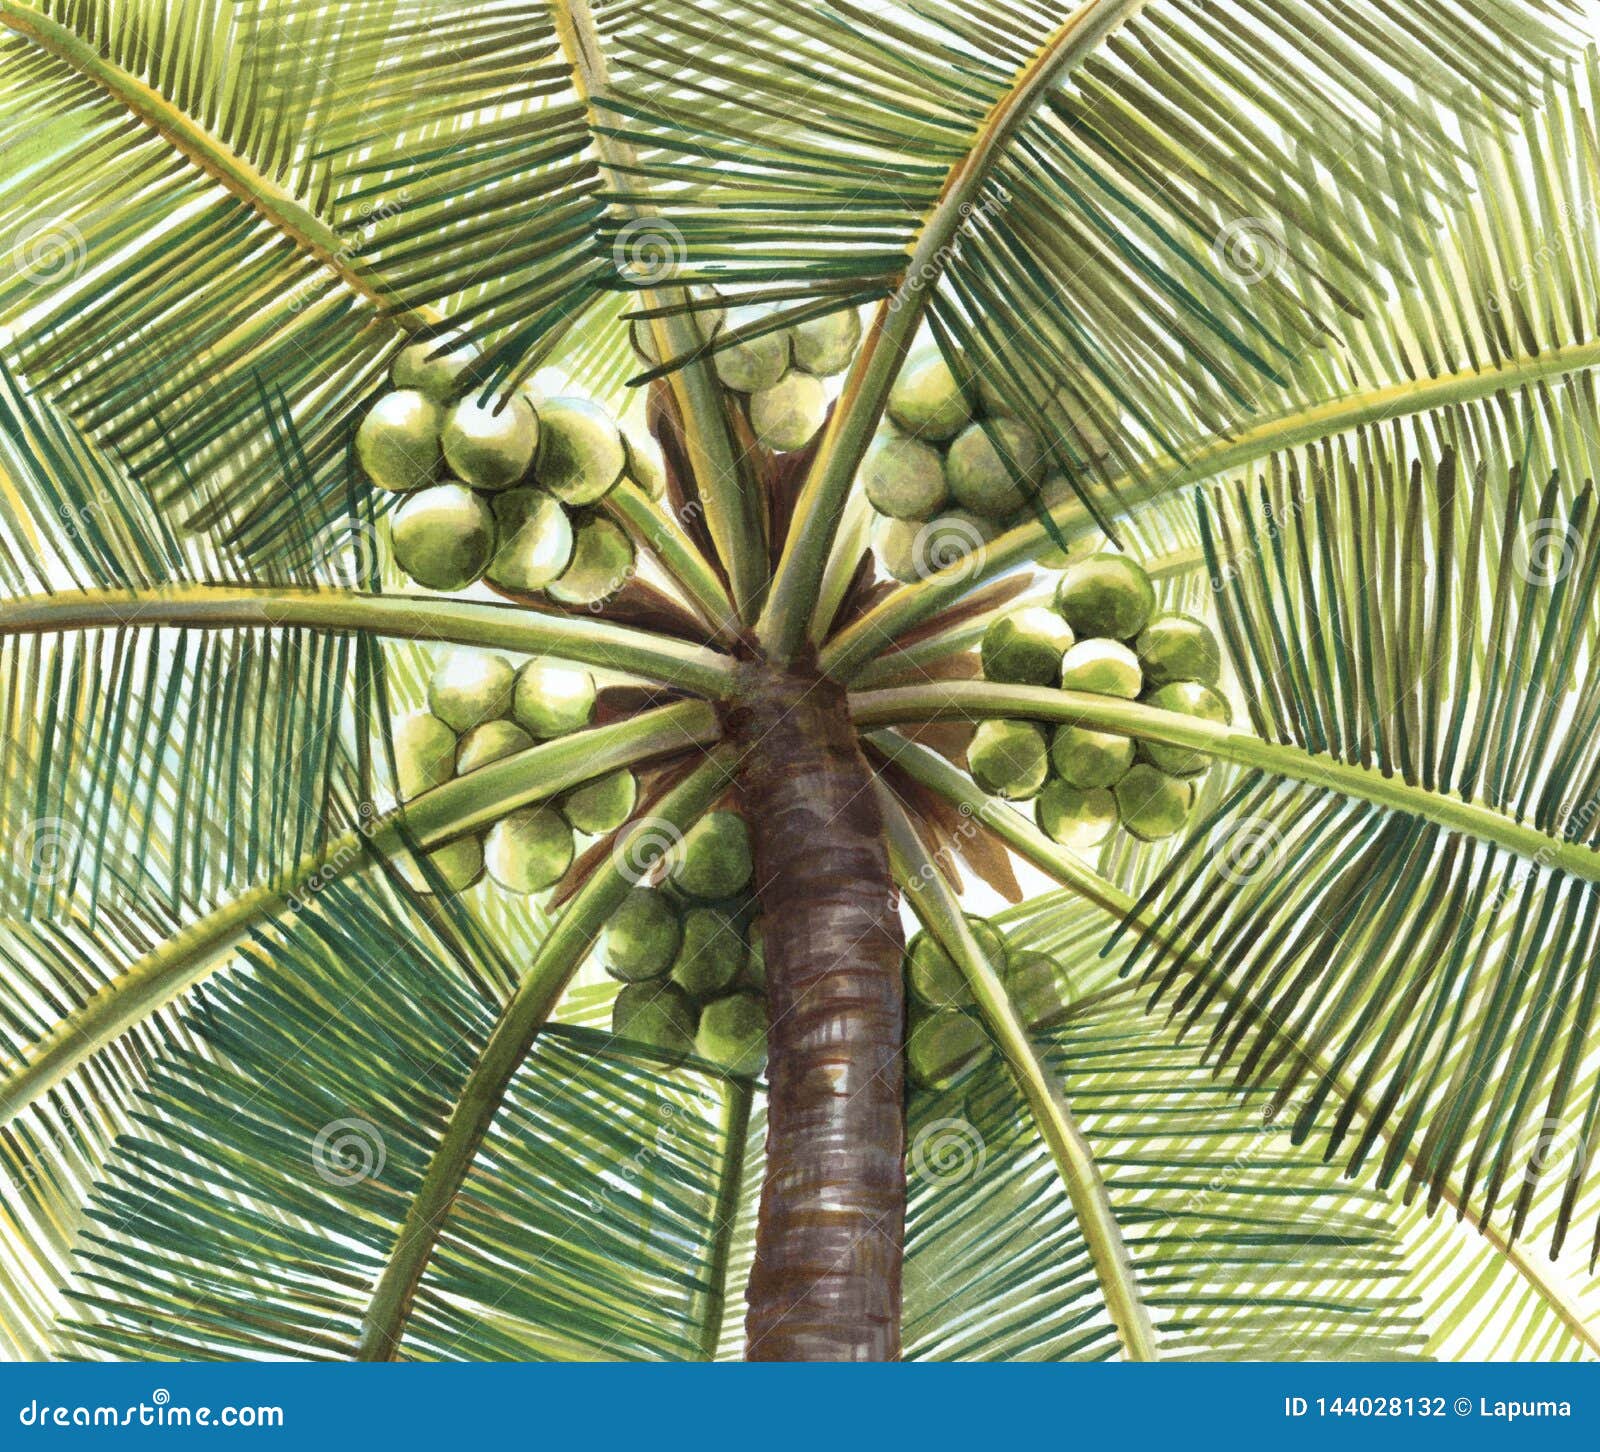 Bottom View of Green Coconut Palm with Coconuts Stock Illustration ...